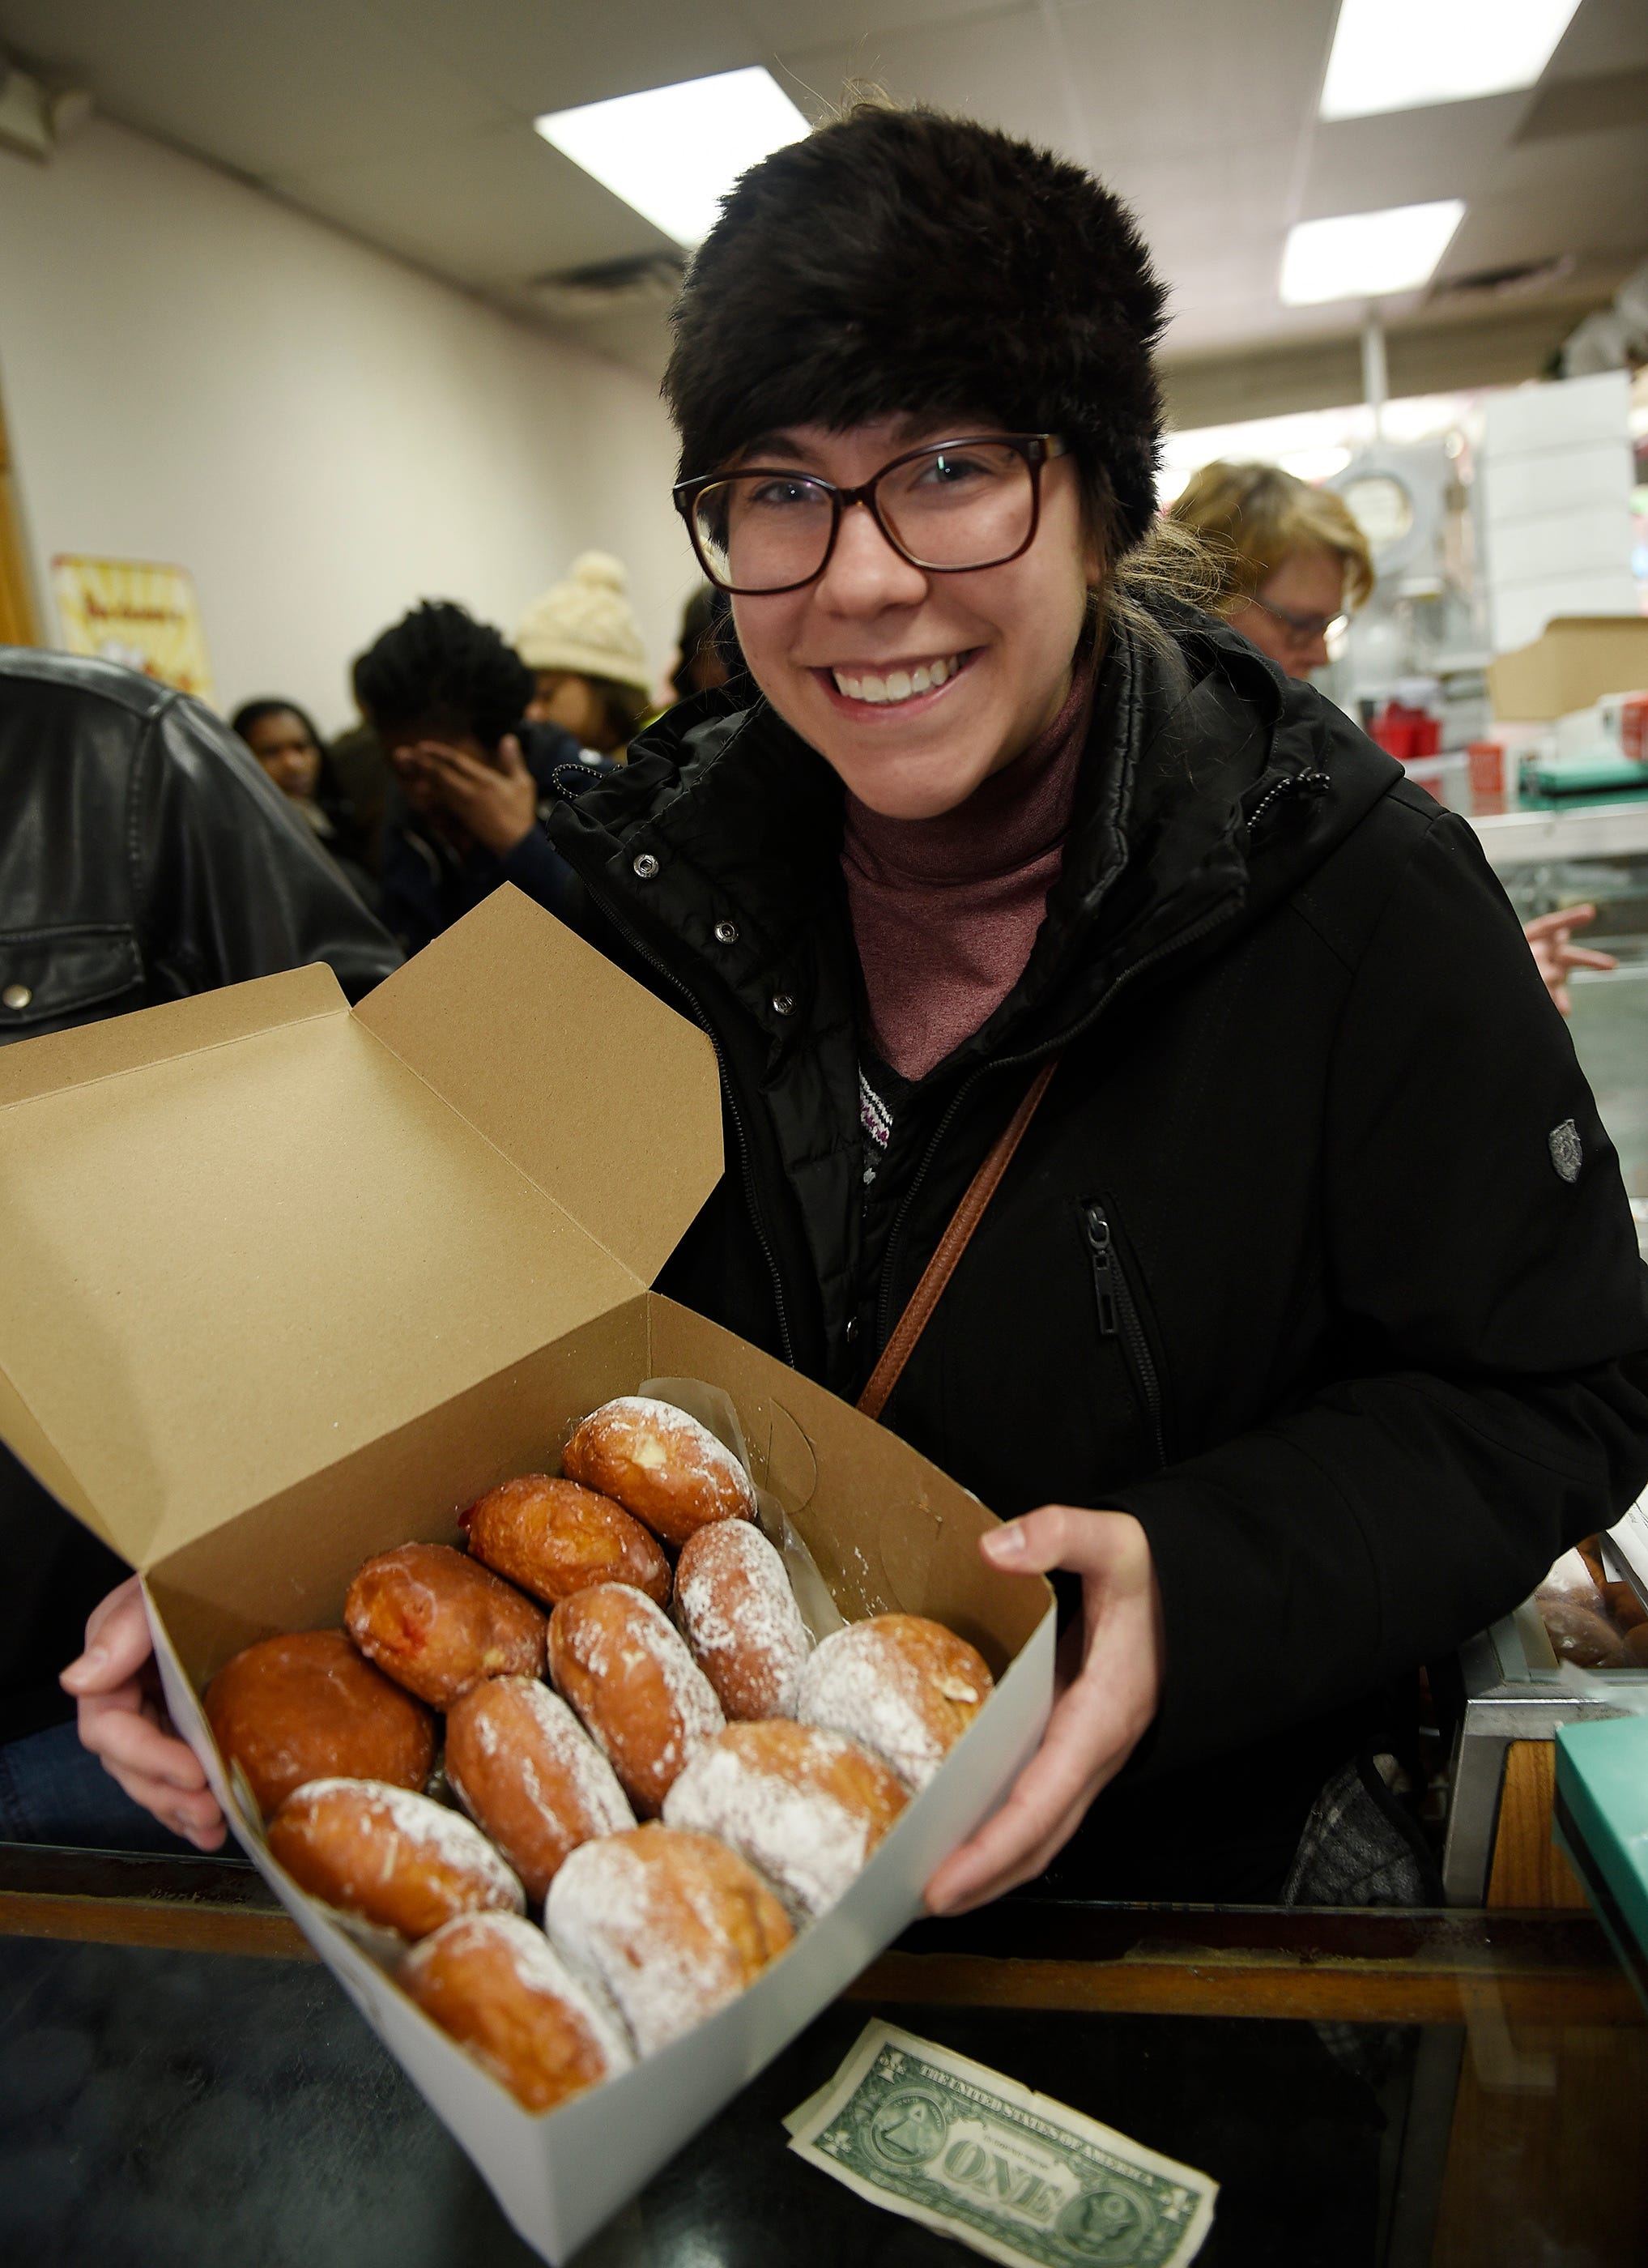 Erin Harris, 26, of Hamtramck displays a dozen of paczki that she will be taking to work for her colleagues.